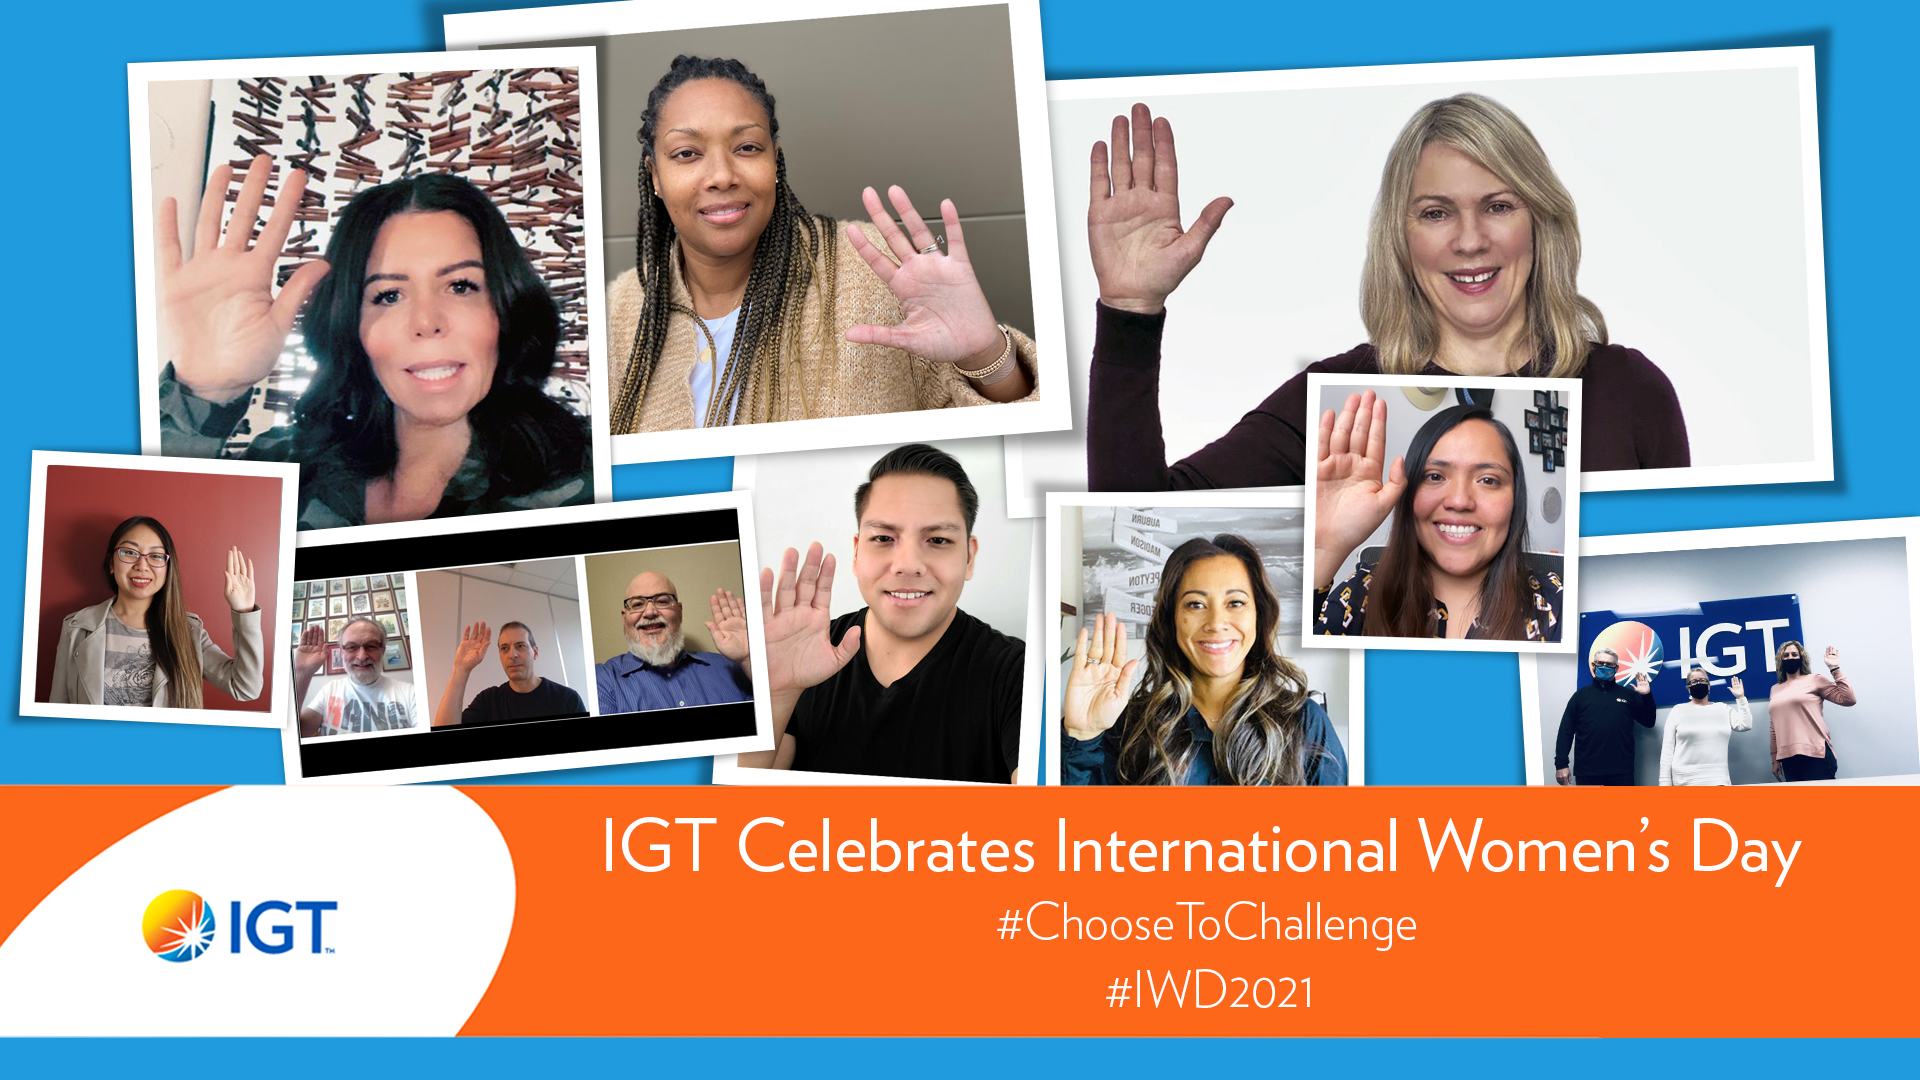 IGT on X: "Happy International Women's Day from IGT! IGT employees from around the world are participating in the #IWD2021 #ChooseToChallenge campaign and pledging their commitment to challenging and calling out gender